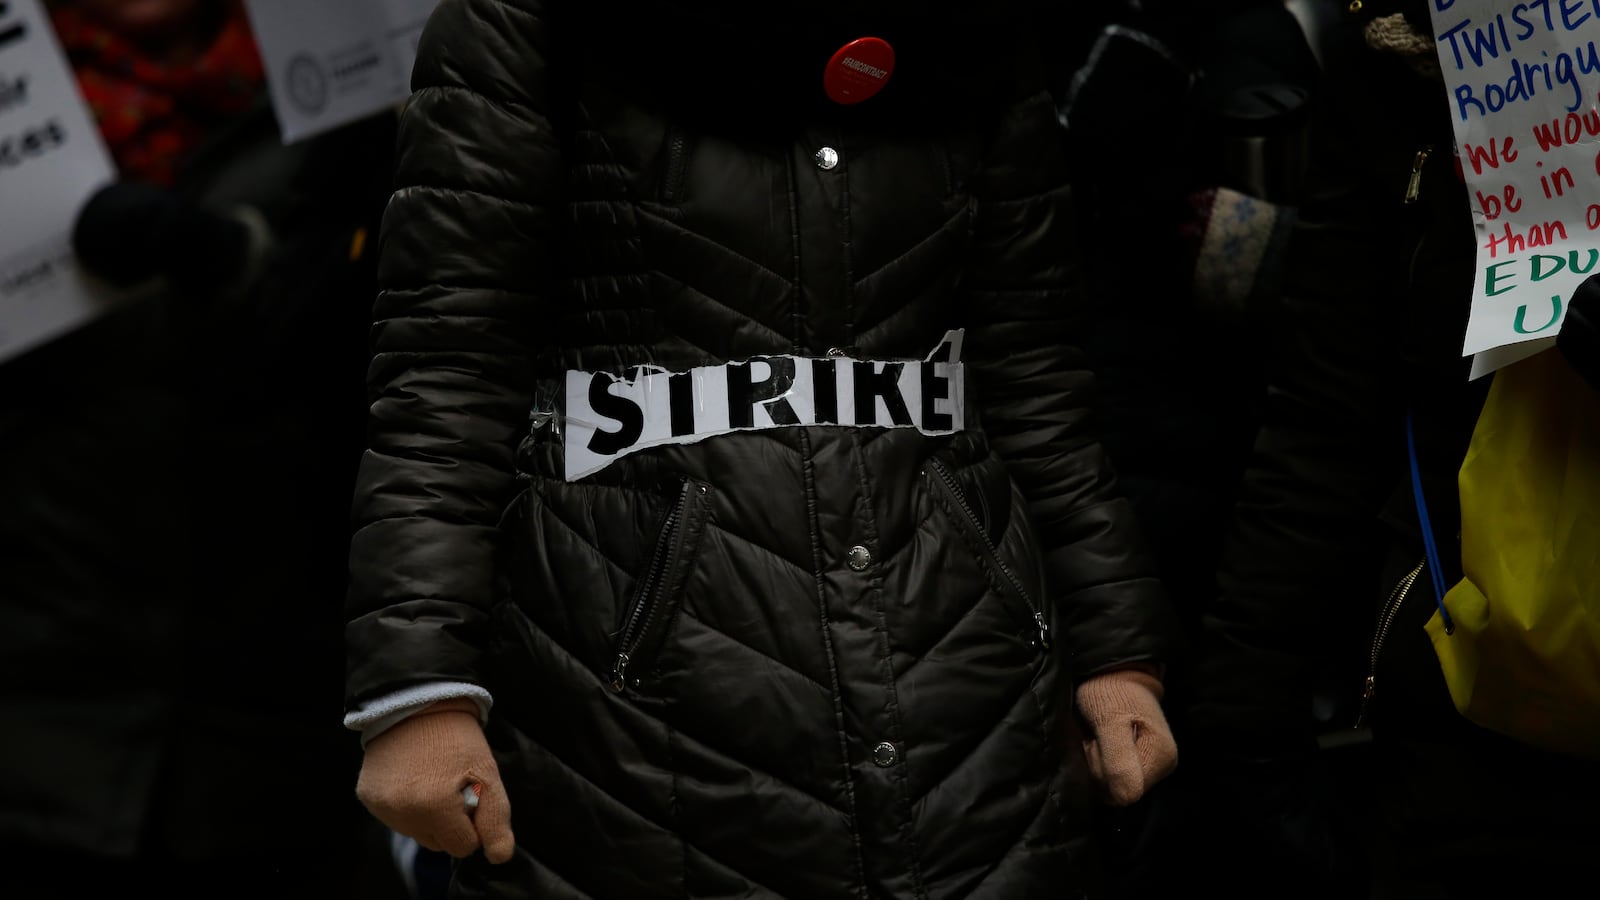 The word 'strike' is taped across a coat as Educators from the Acero charter school network protest during a strike outside Chicago Public Schools headquarters in December